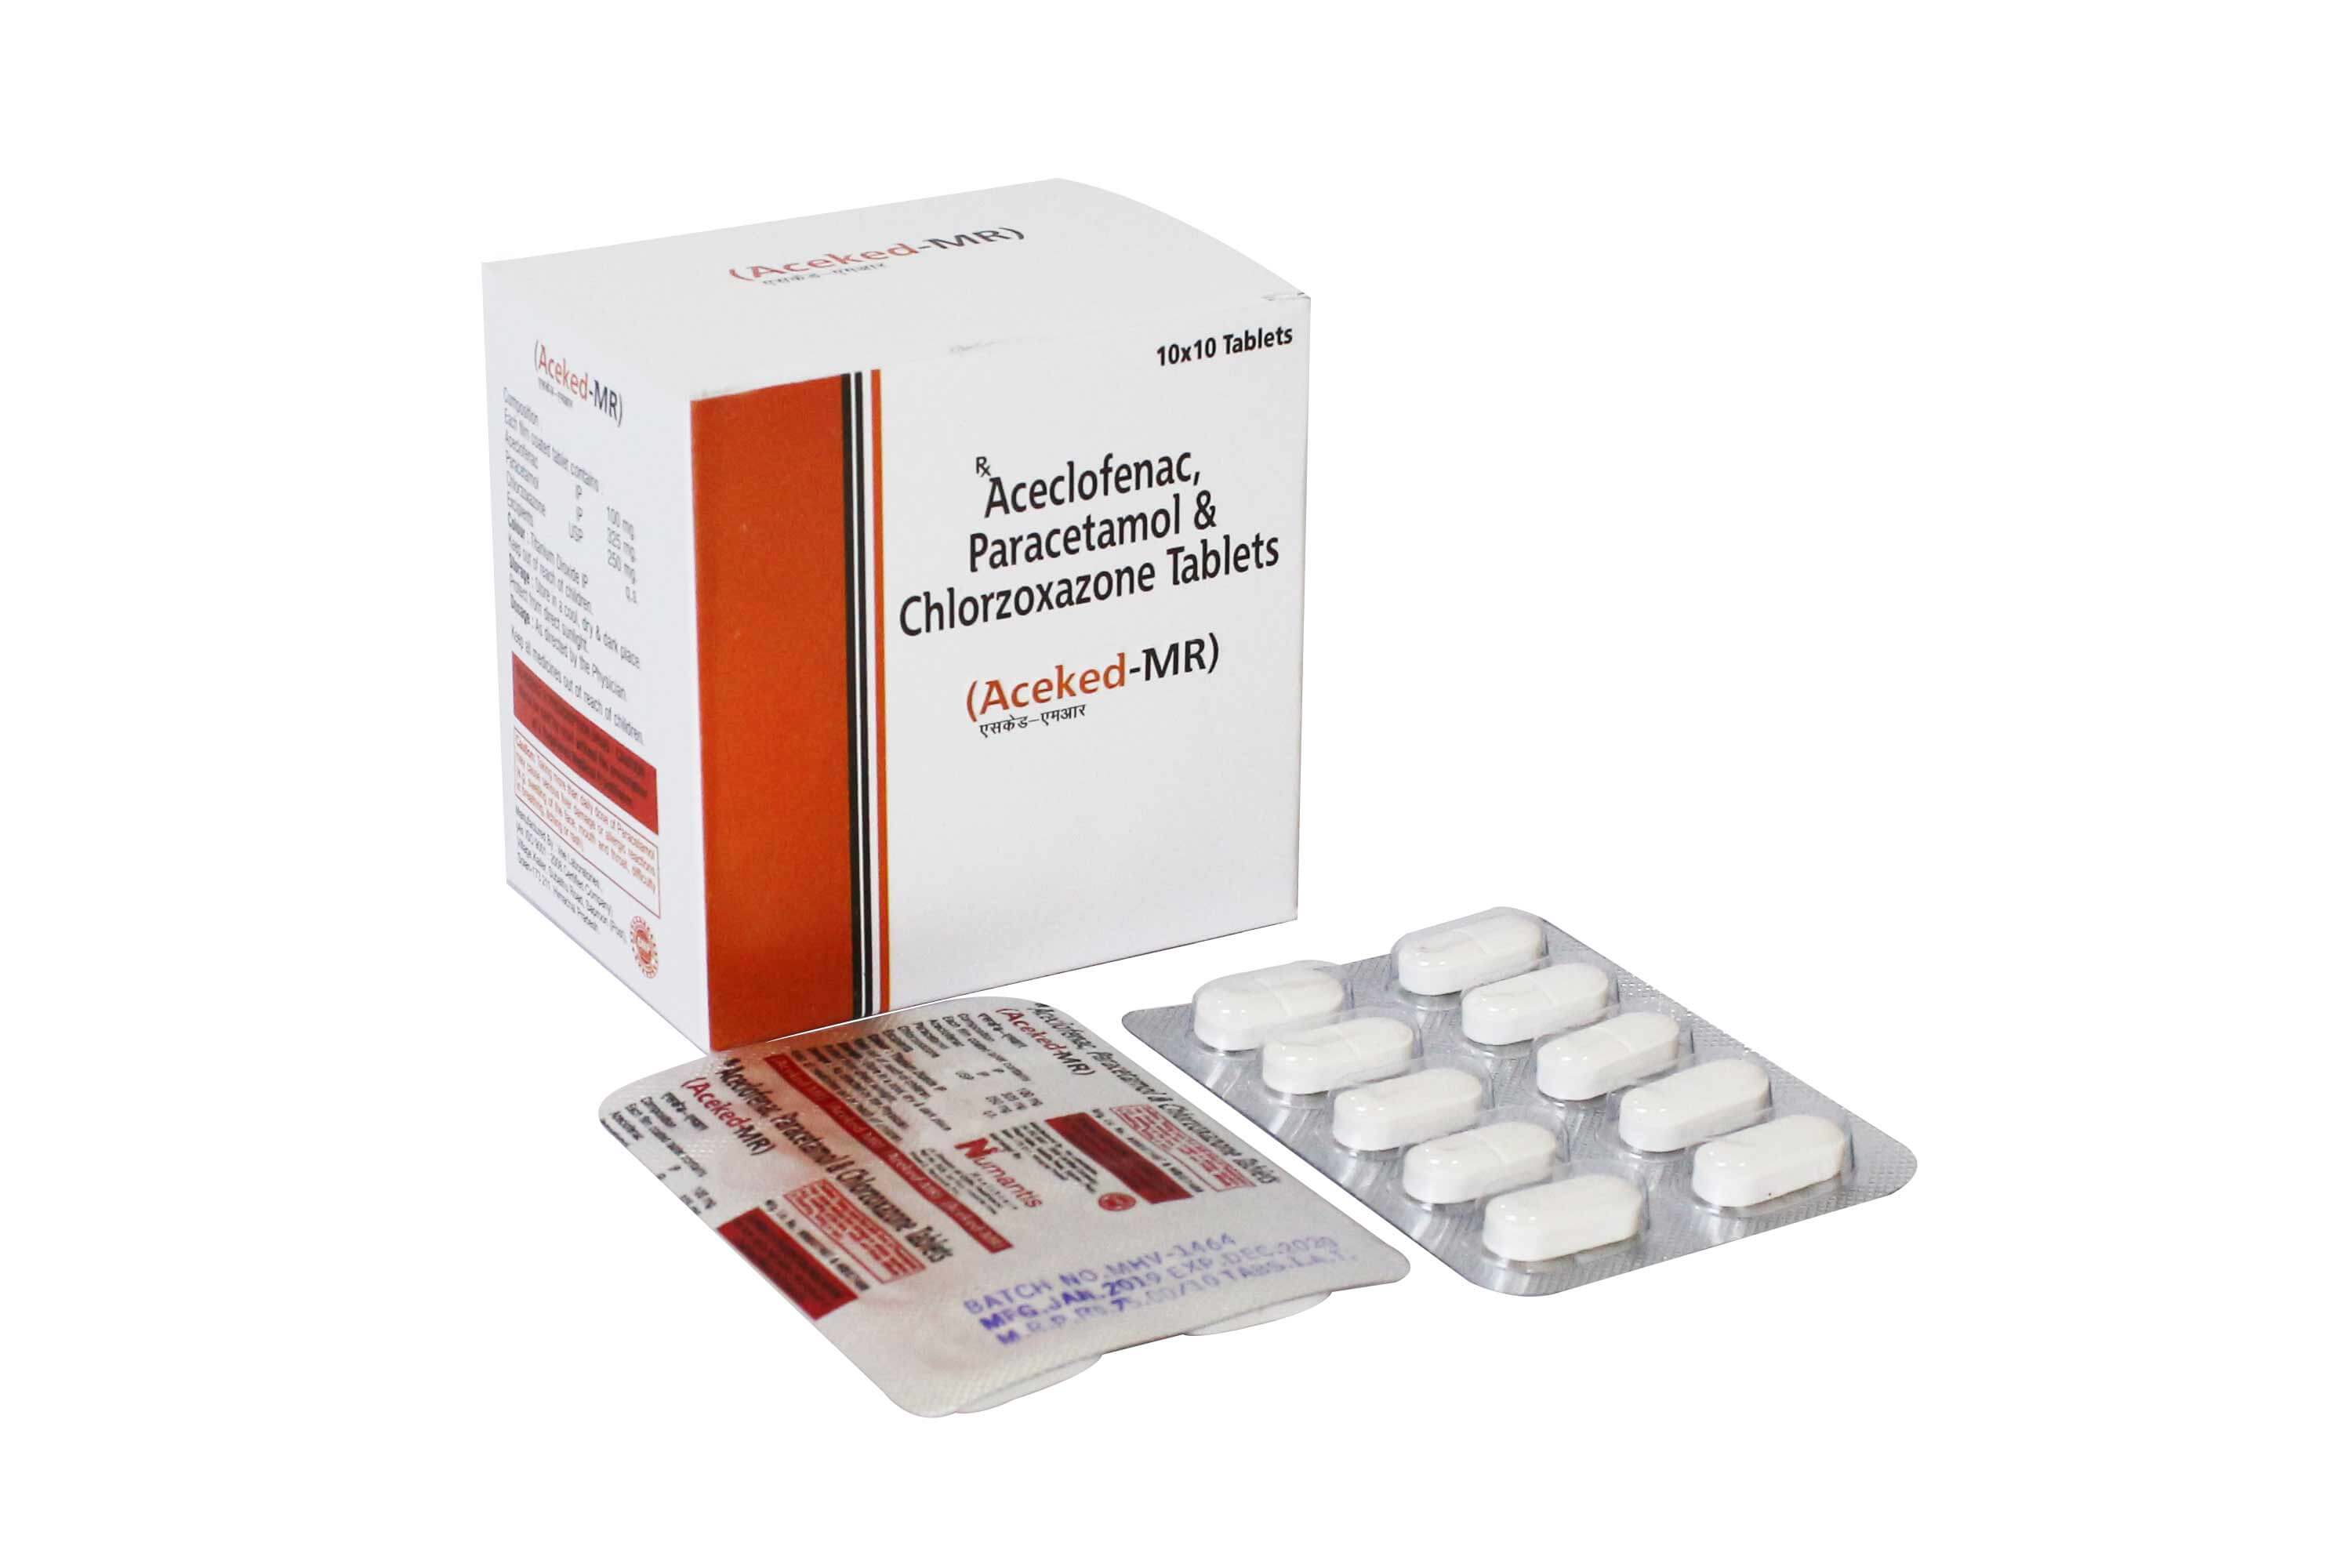 Product Name: Aceked MR, Compositions of Aceked MR are Aceclofenac Paracetamol &Chlorzxazone Tablets - Numantis Healthcare